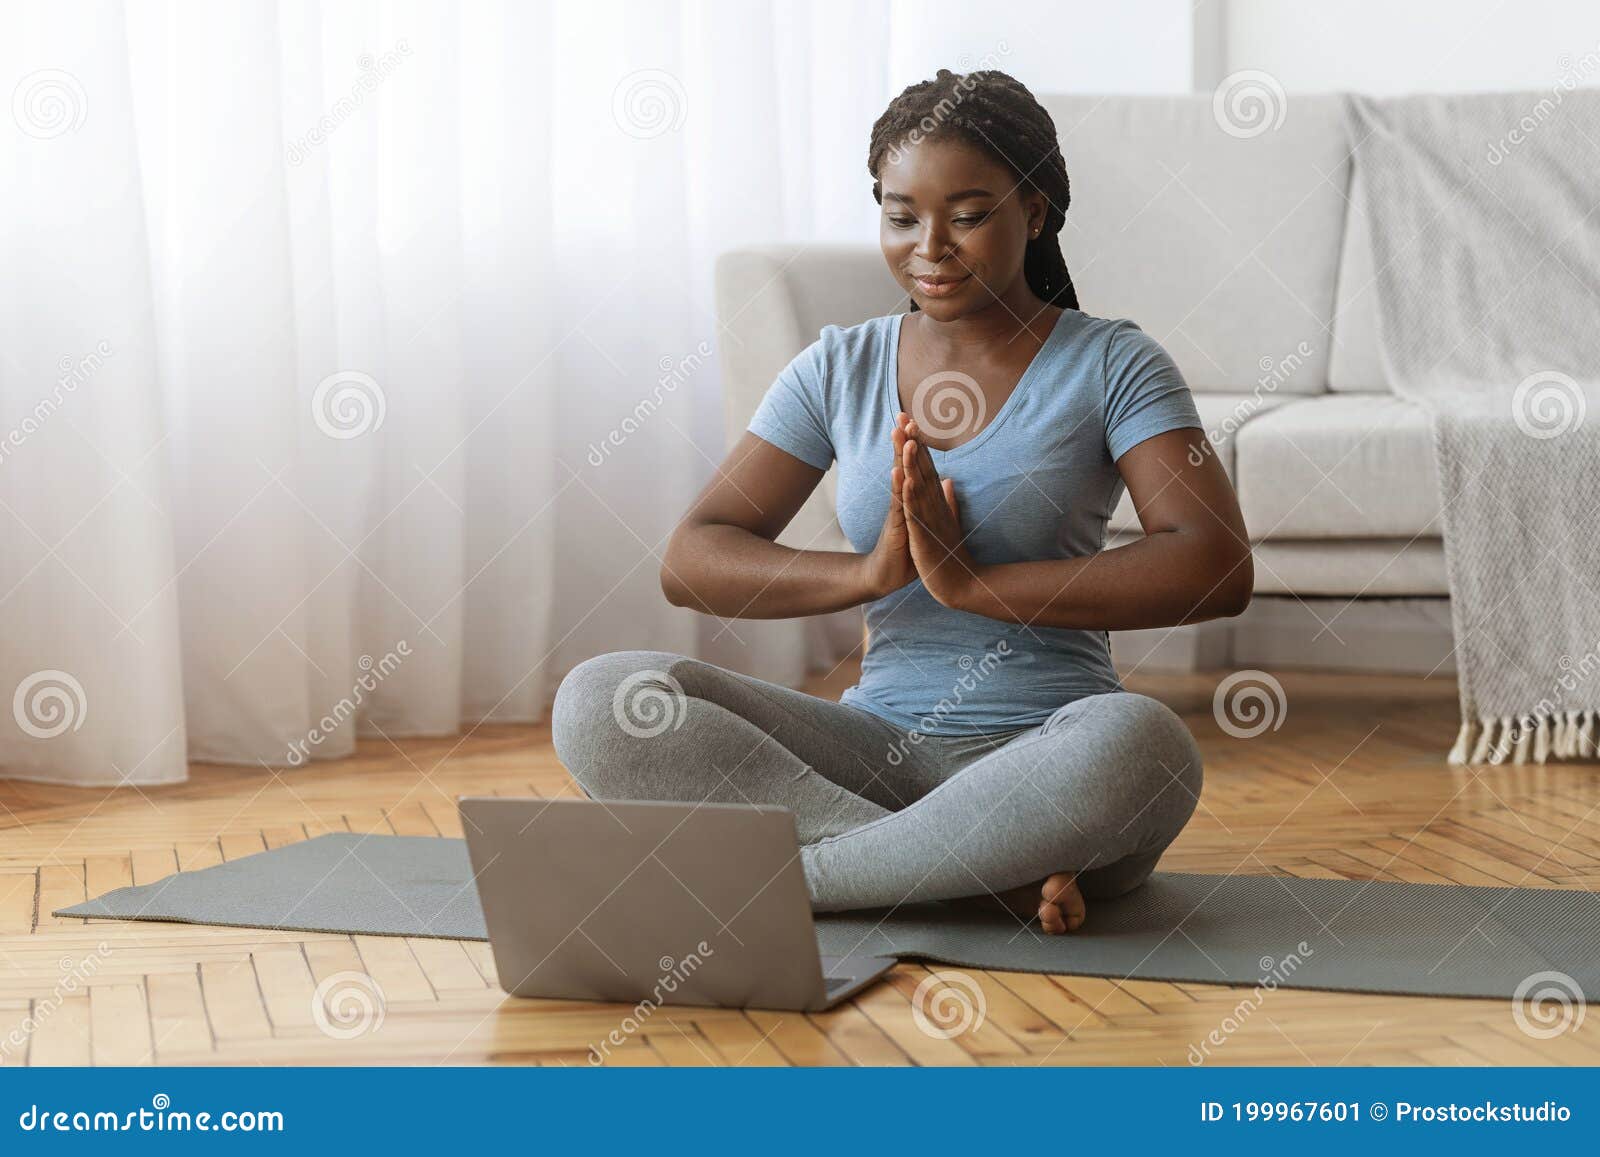 Online Meditation. Black Lady Practicing Yoga in Front of Laptop at Home  Stock Image - Image of afro, meditation: 199967601